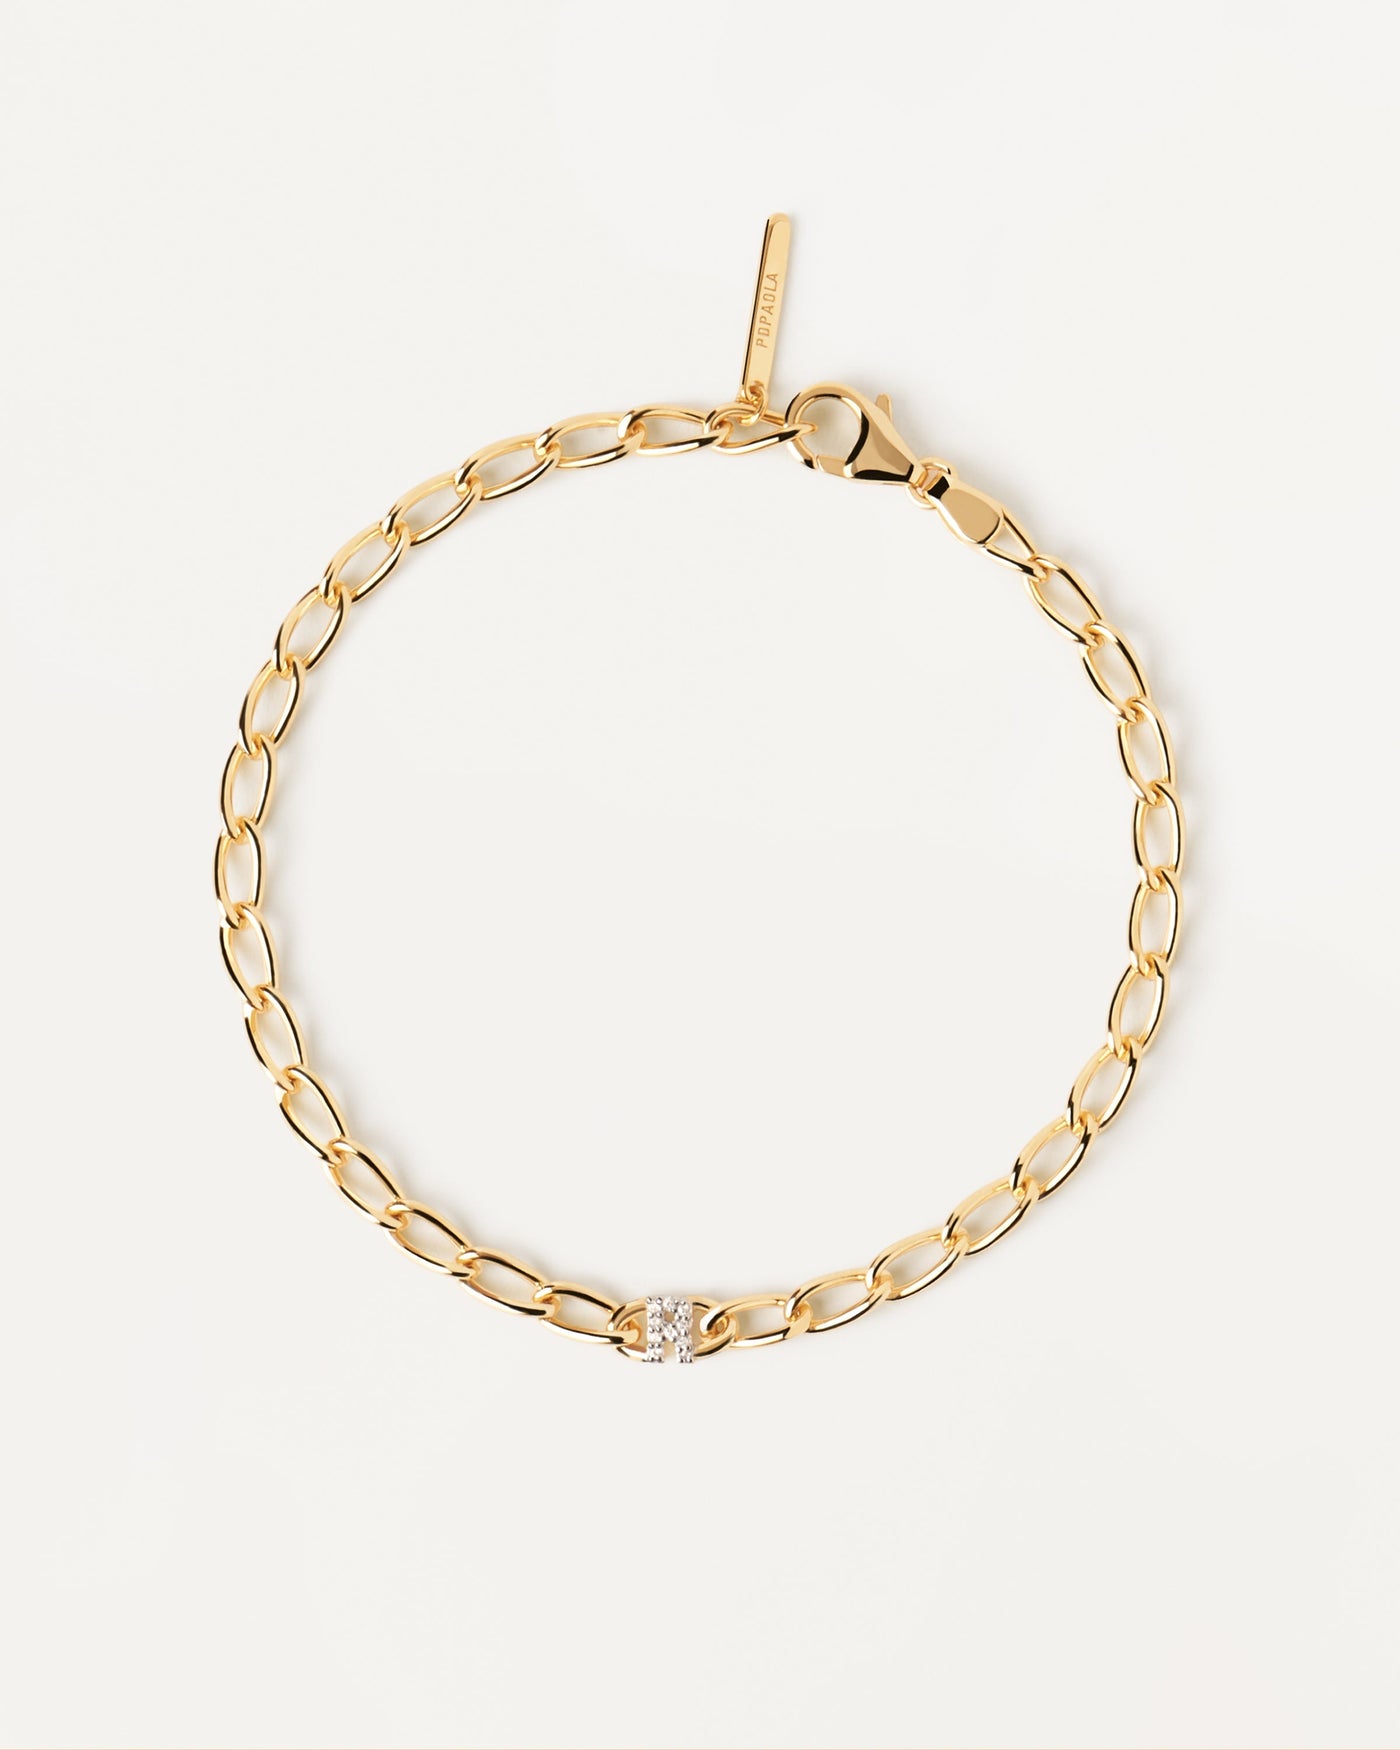 2023 Selection | Letter R Chain Bracelet. cable chain bracelet in gold-plated silver with initial R in zirconia. Get the latest arrival from PDPAOLA. Place your order safely and get this Best Seller. Free Shipping.